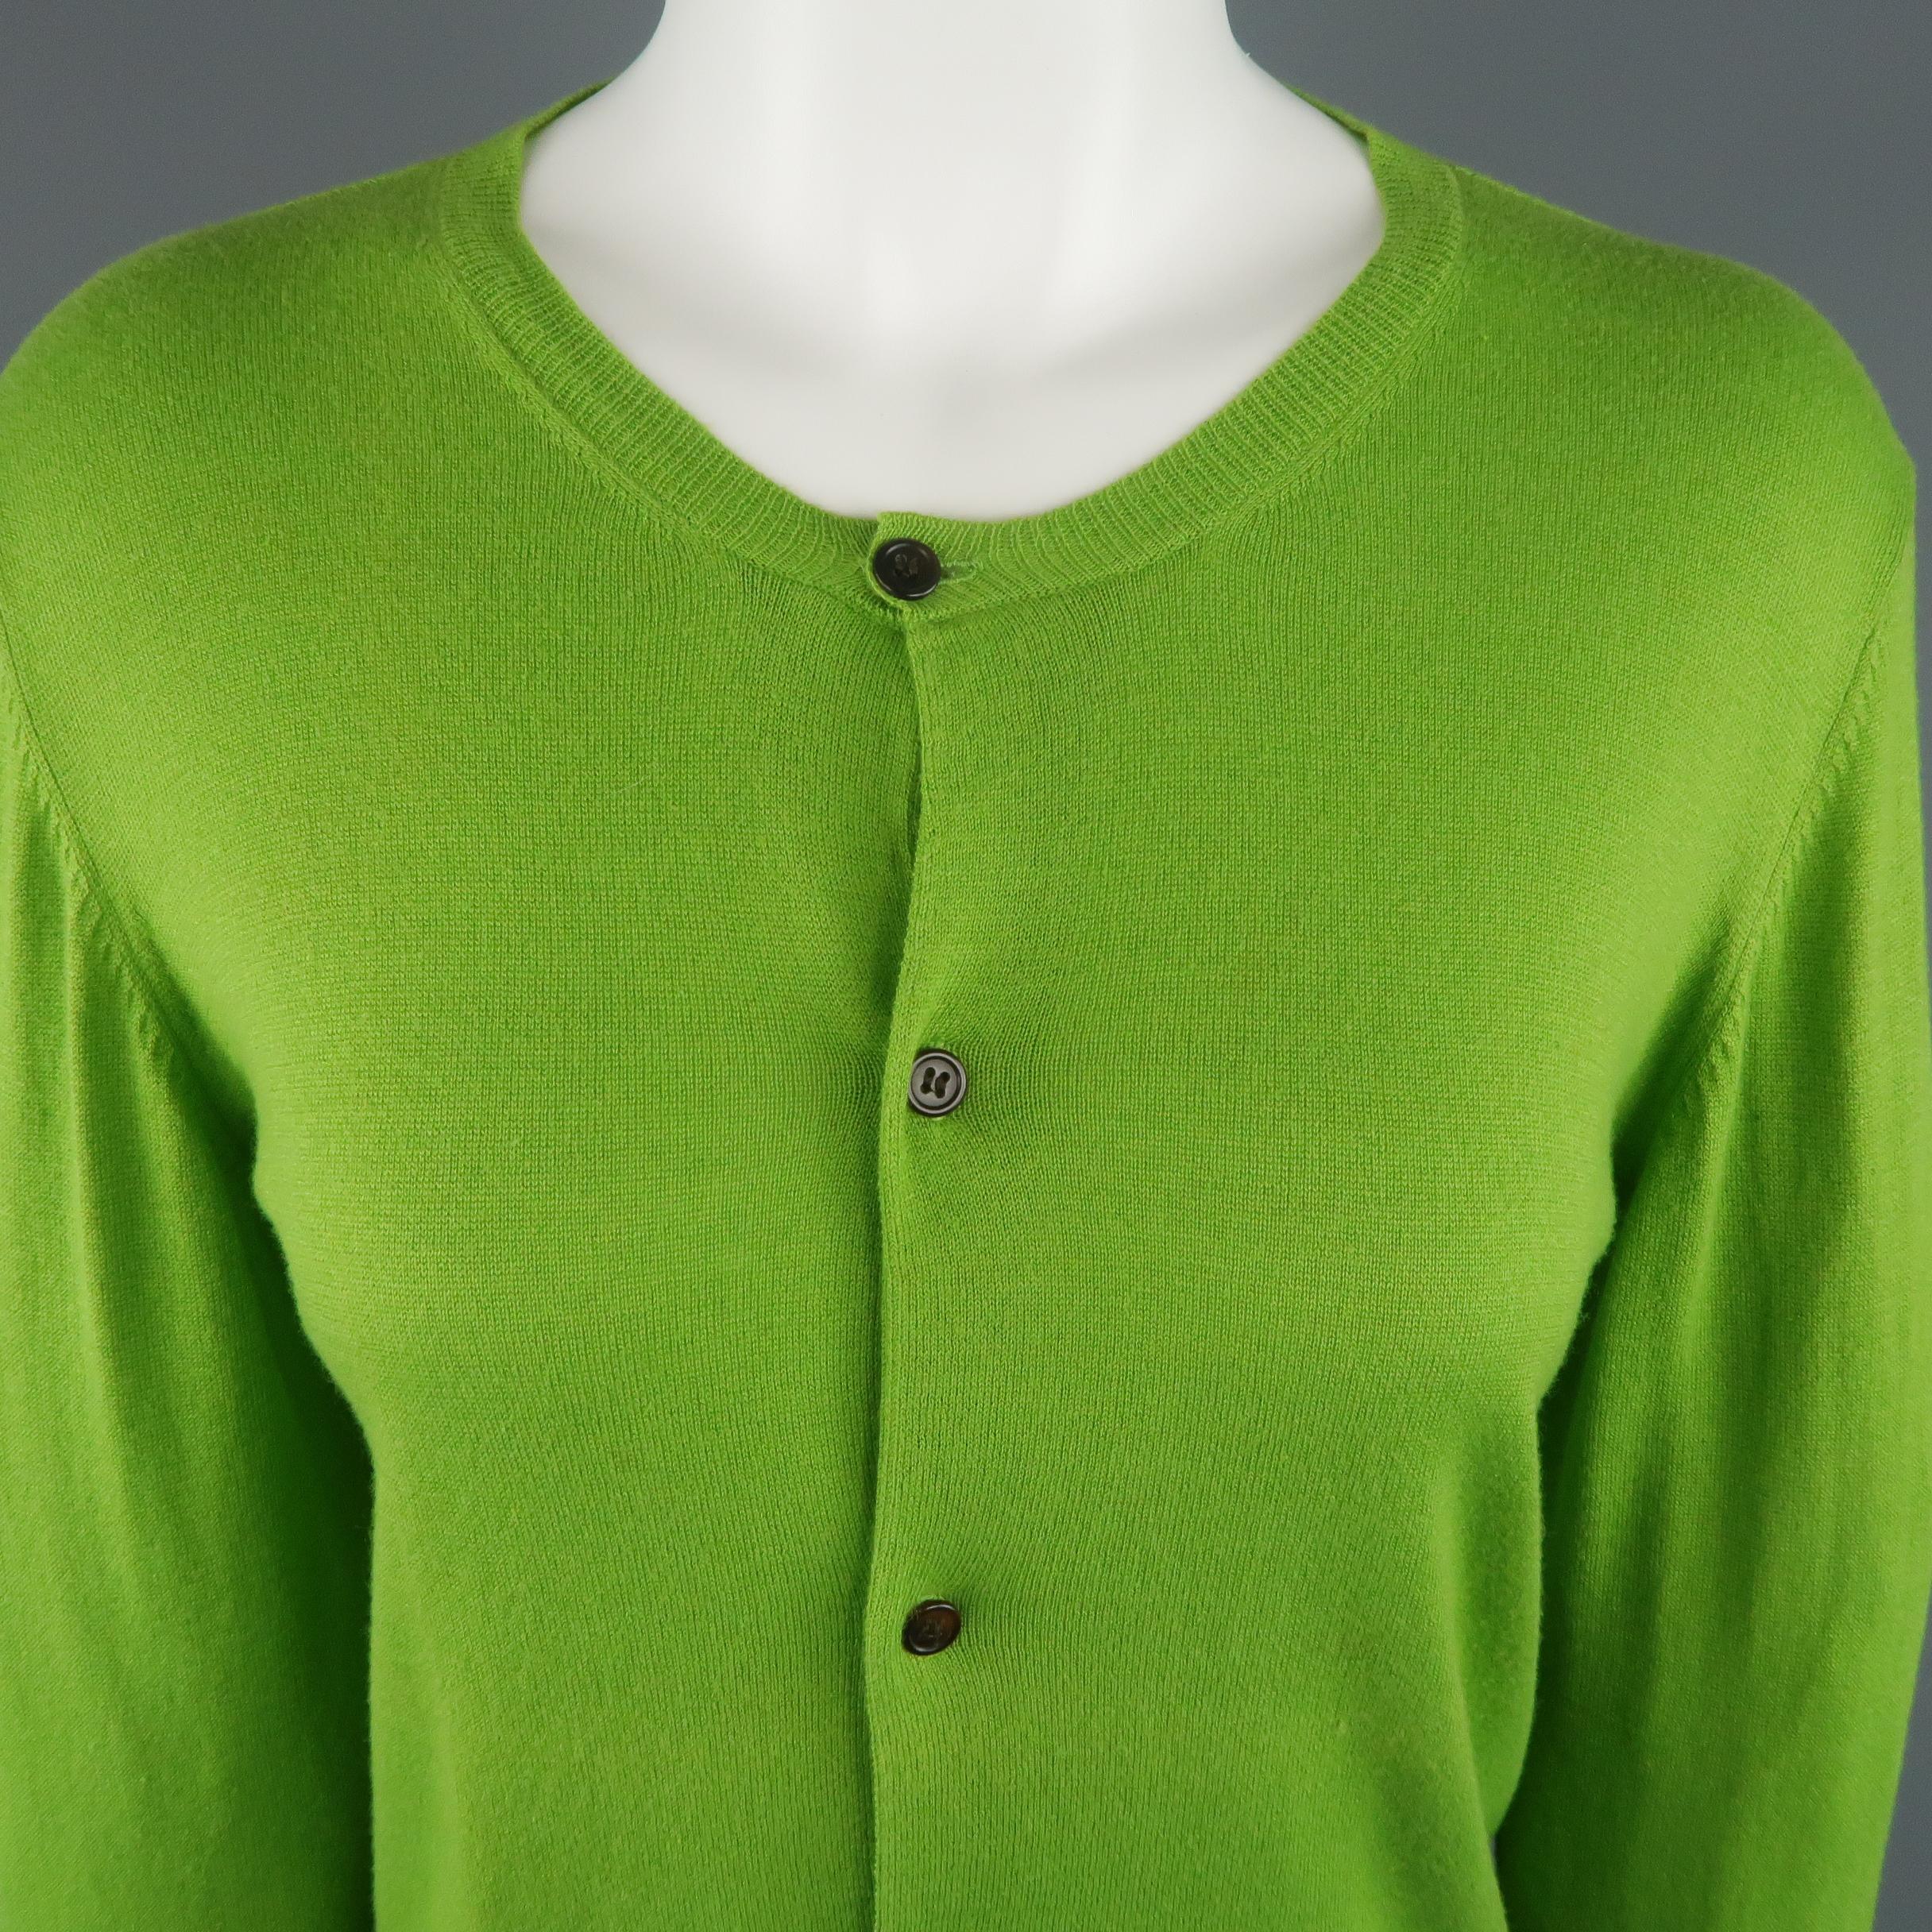 Y'S by YOHJI YAMAMOTO cardigan comes in green cotton blend knit light weight knit with a round neck and olive green ribbed back panel.
 
Excellent Pre-Owned Condition.
Marked: JP 2
 
Measurements:
 
Shoulder: 17 in.
Bust: 36 in.
Sleeve: 28